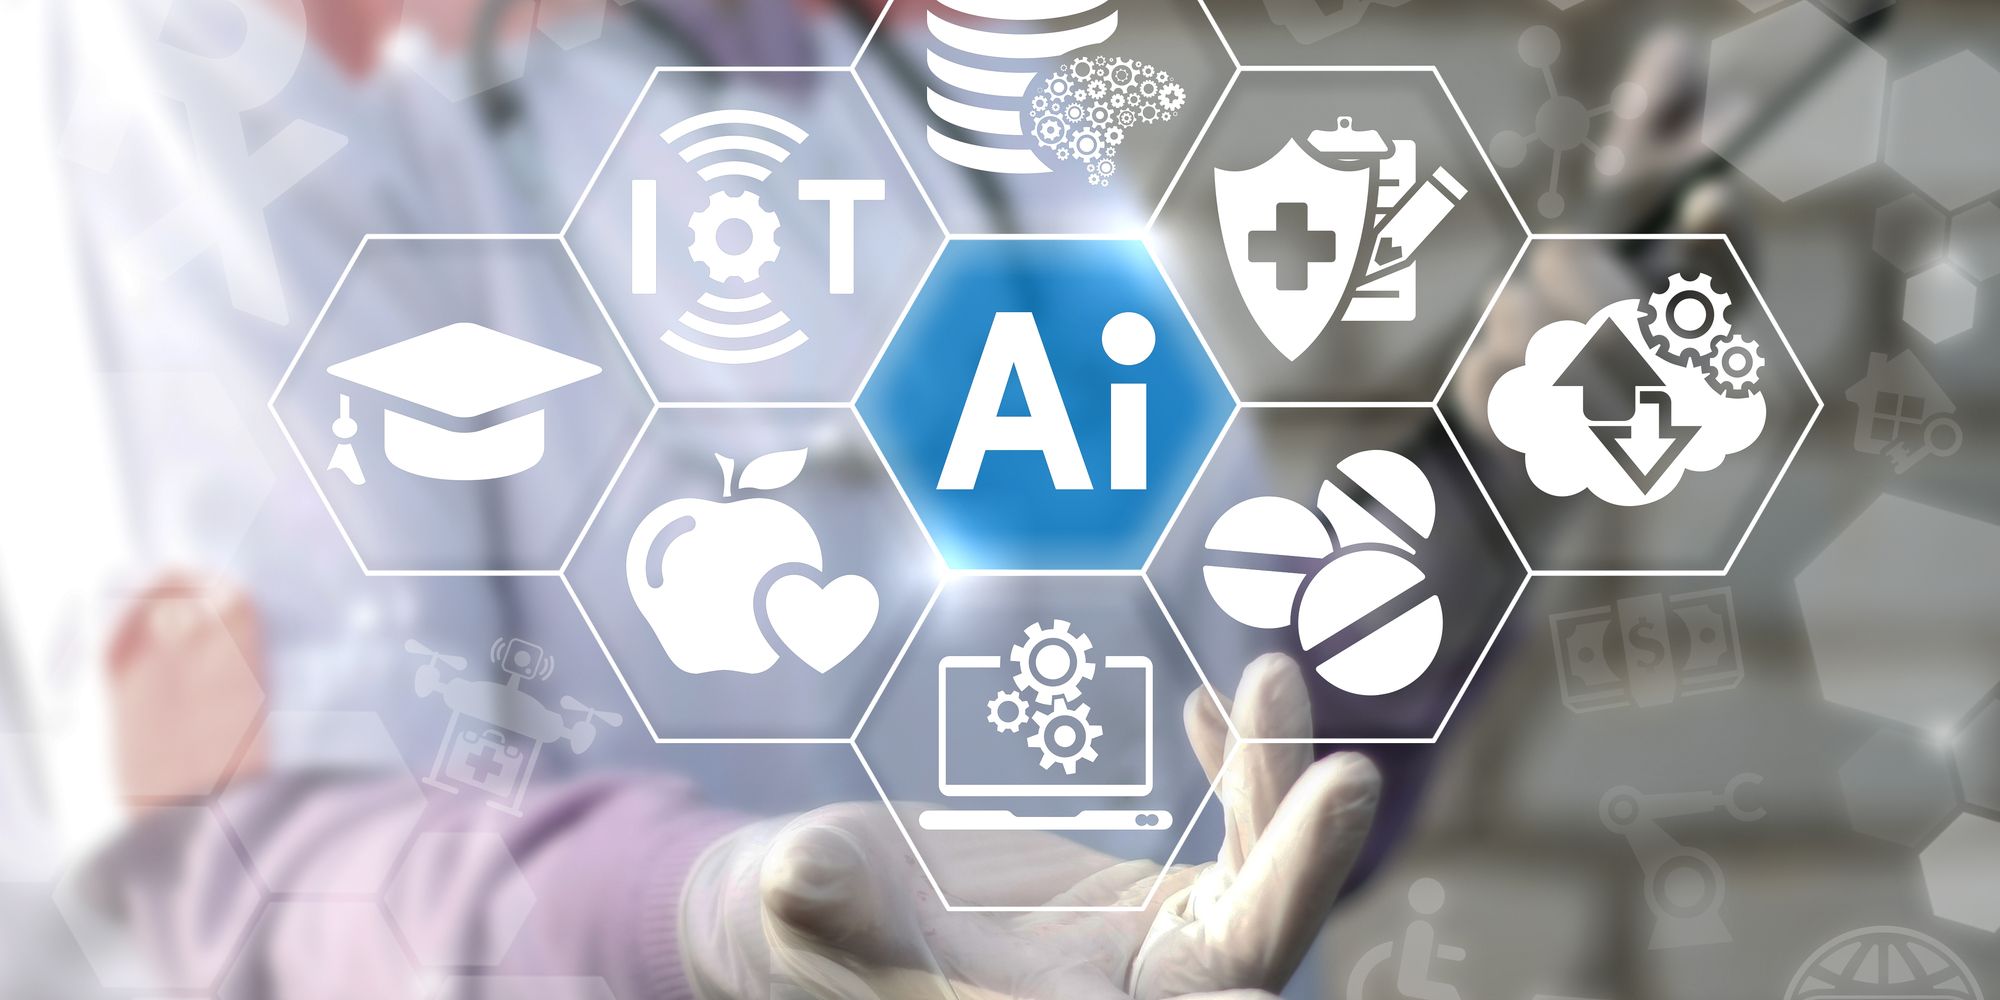 Top 8 Industrial Artificial Intelligence Or AI Applications